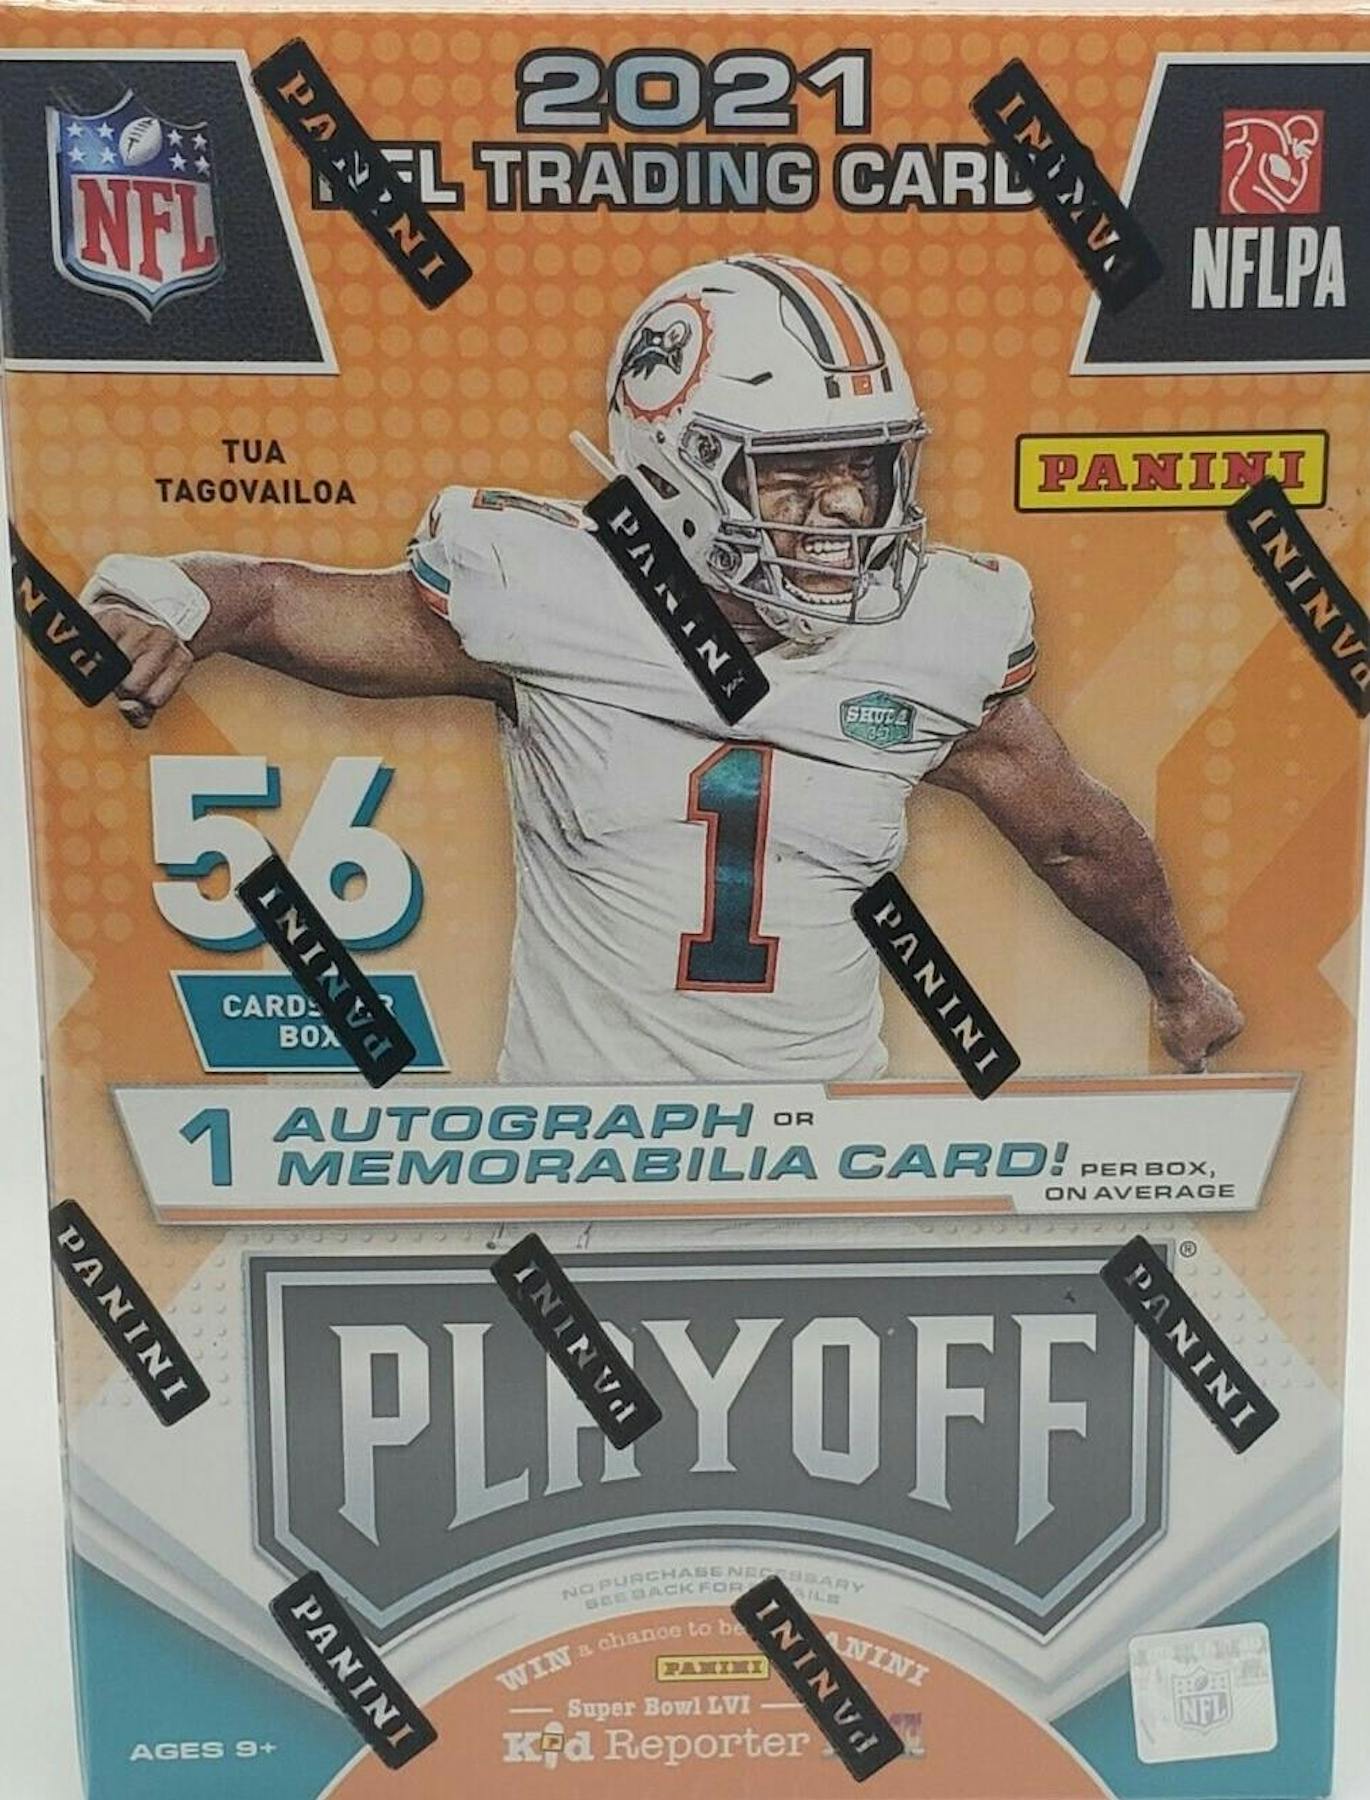 2021 Leaf Draft Football Blaster Box BRAND NEW - collectibles - by